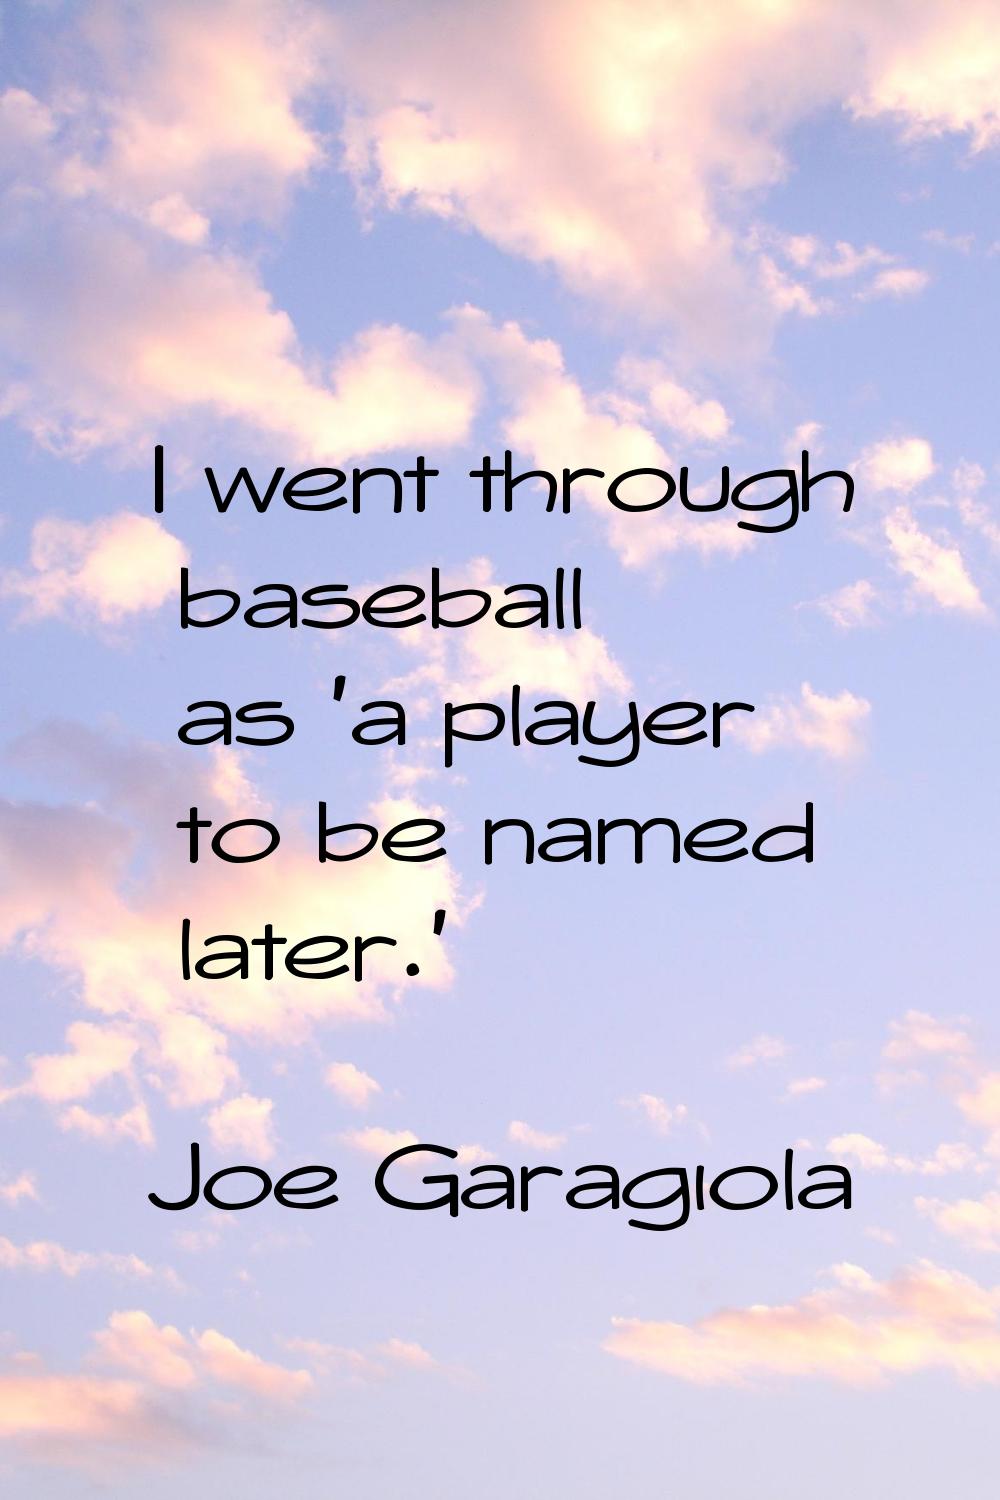 I went through baseball as 'a player to be named later.'